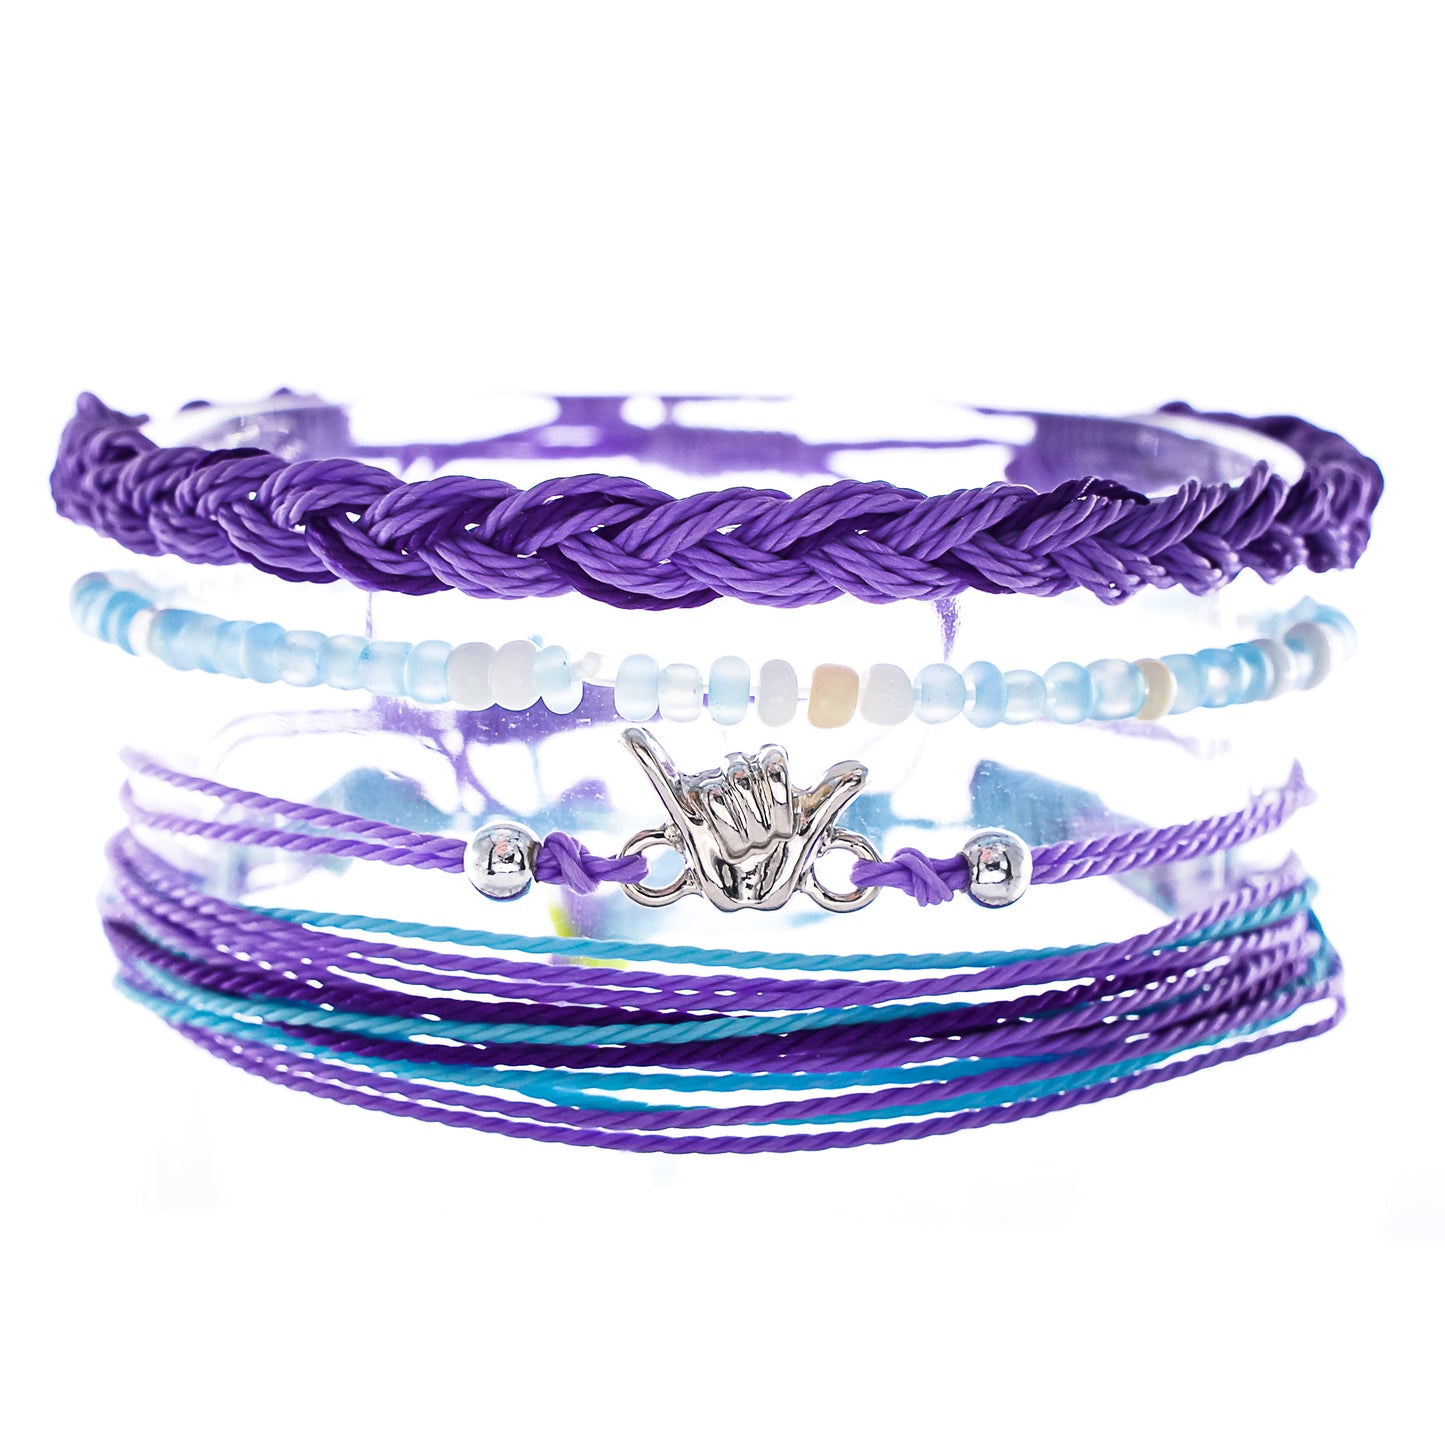 purple shaka hang loose charm with string bracelets style pack